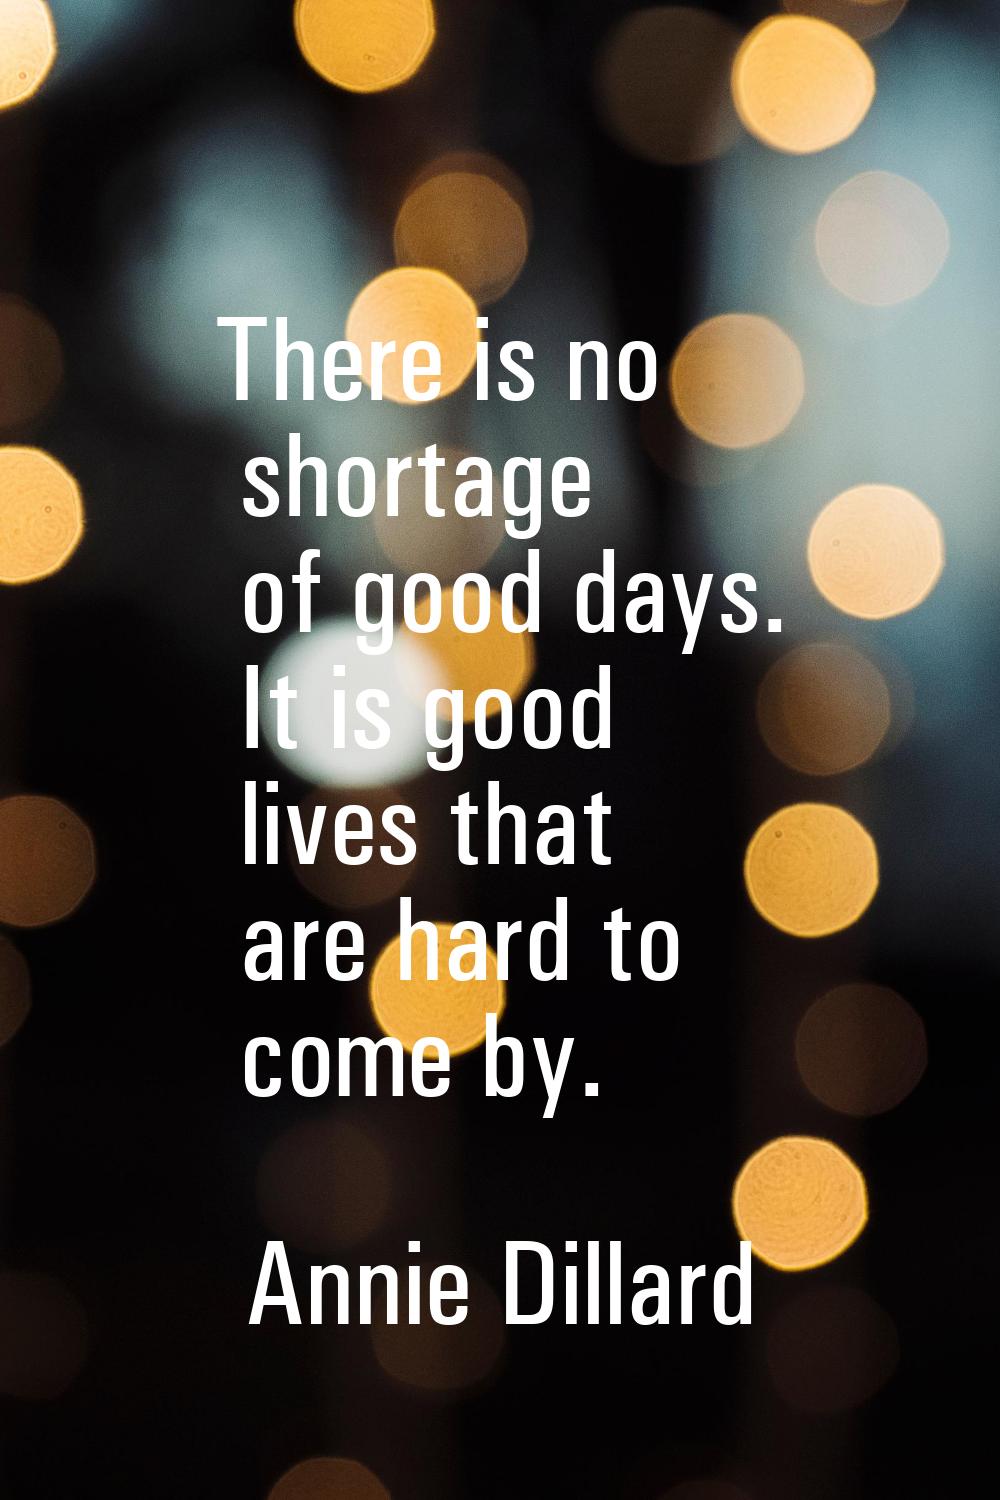 There is no shortage of good days. It is good lives that are hard to come by.